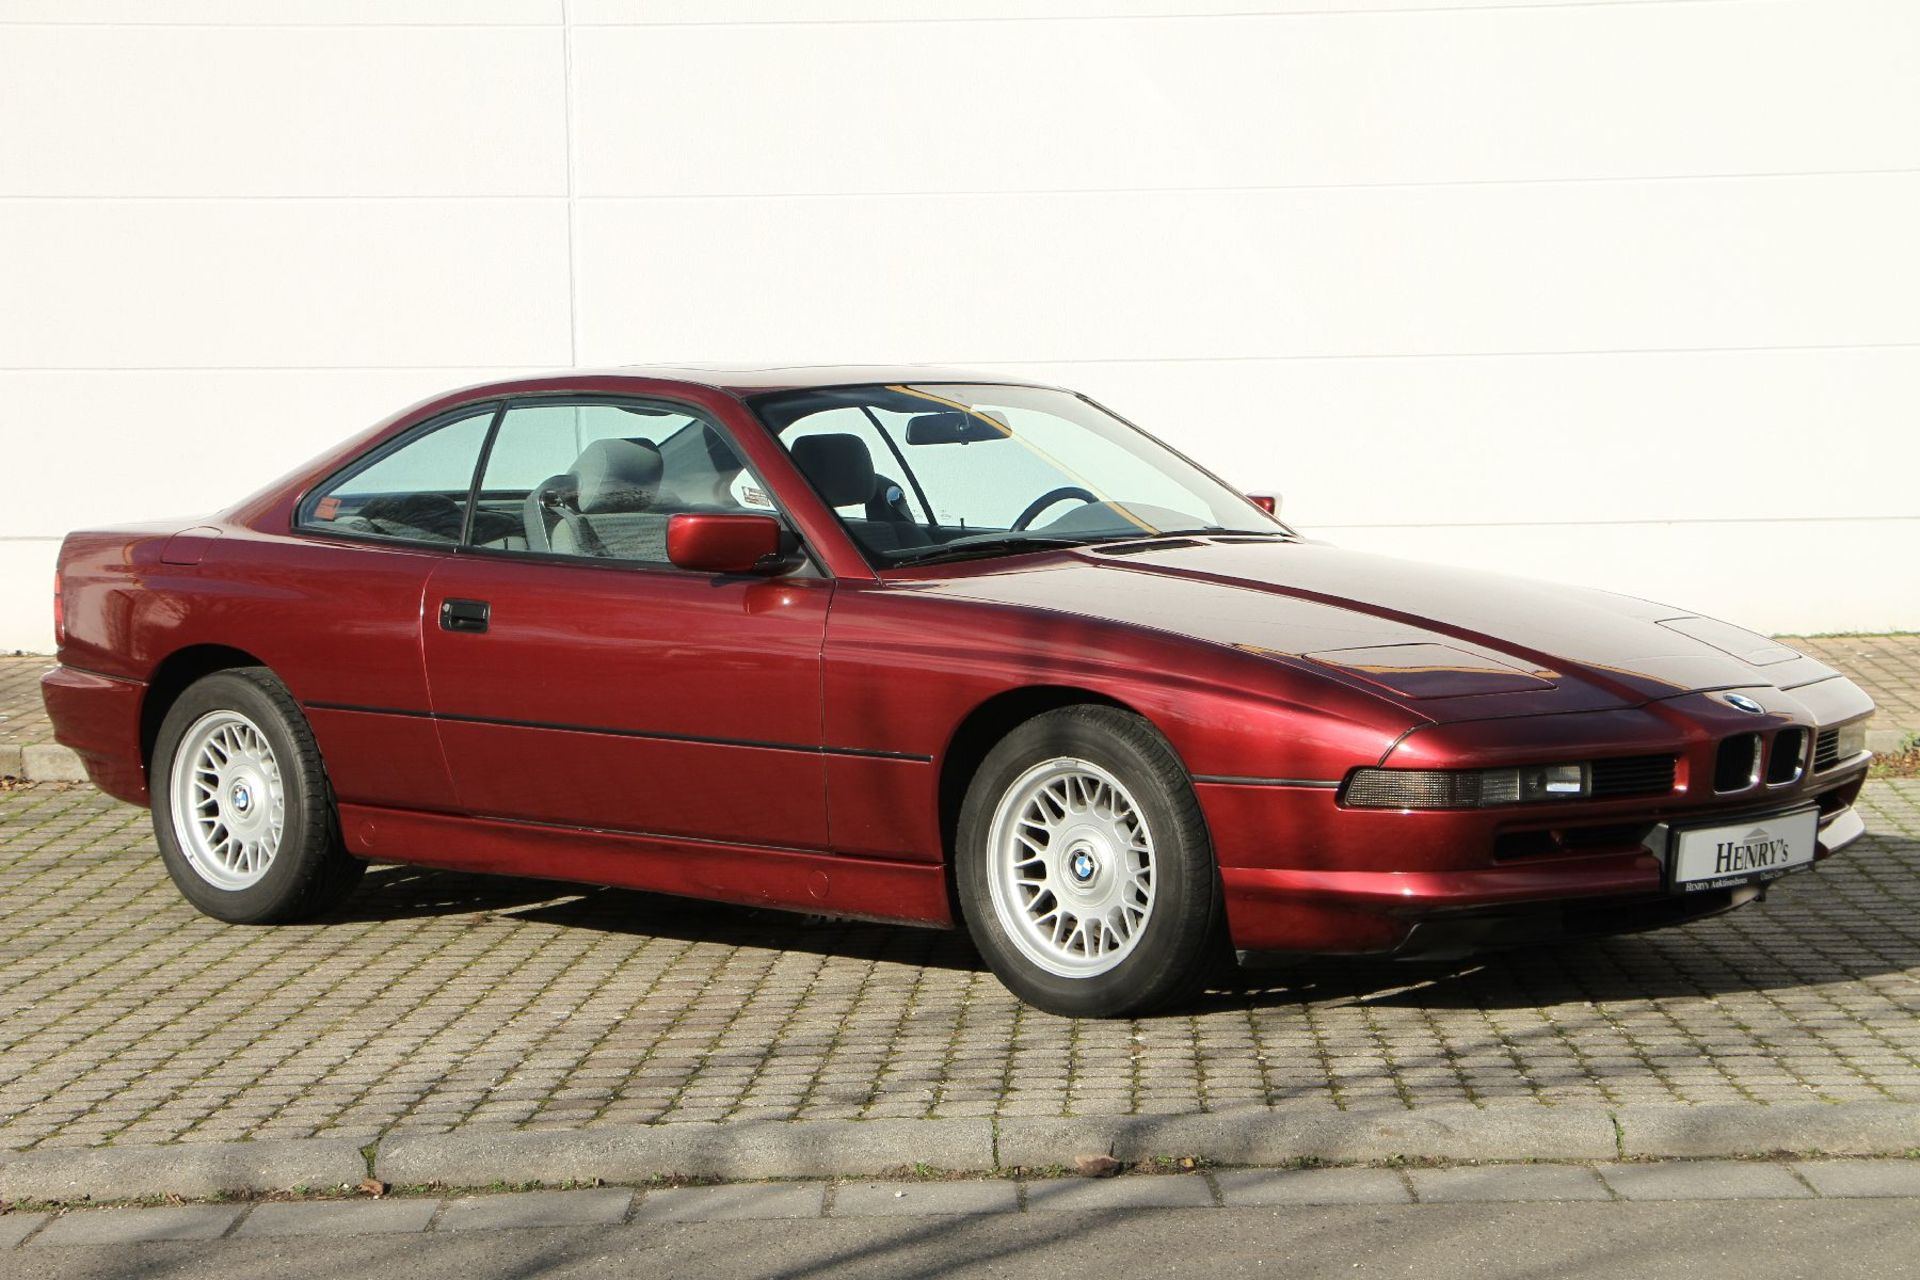 BMW 850i Coupé, Chassis Number:WBAEG21020CB10493, first registered 05/1992, german collector car